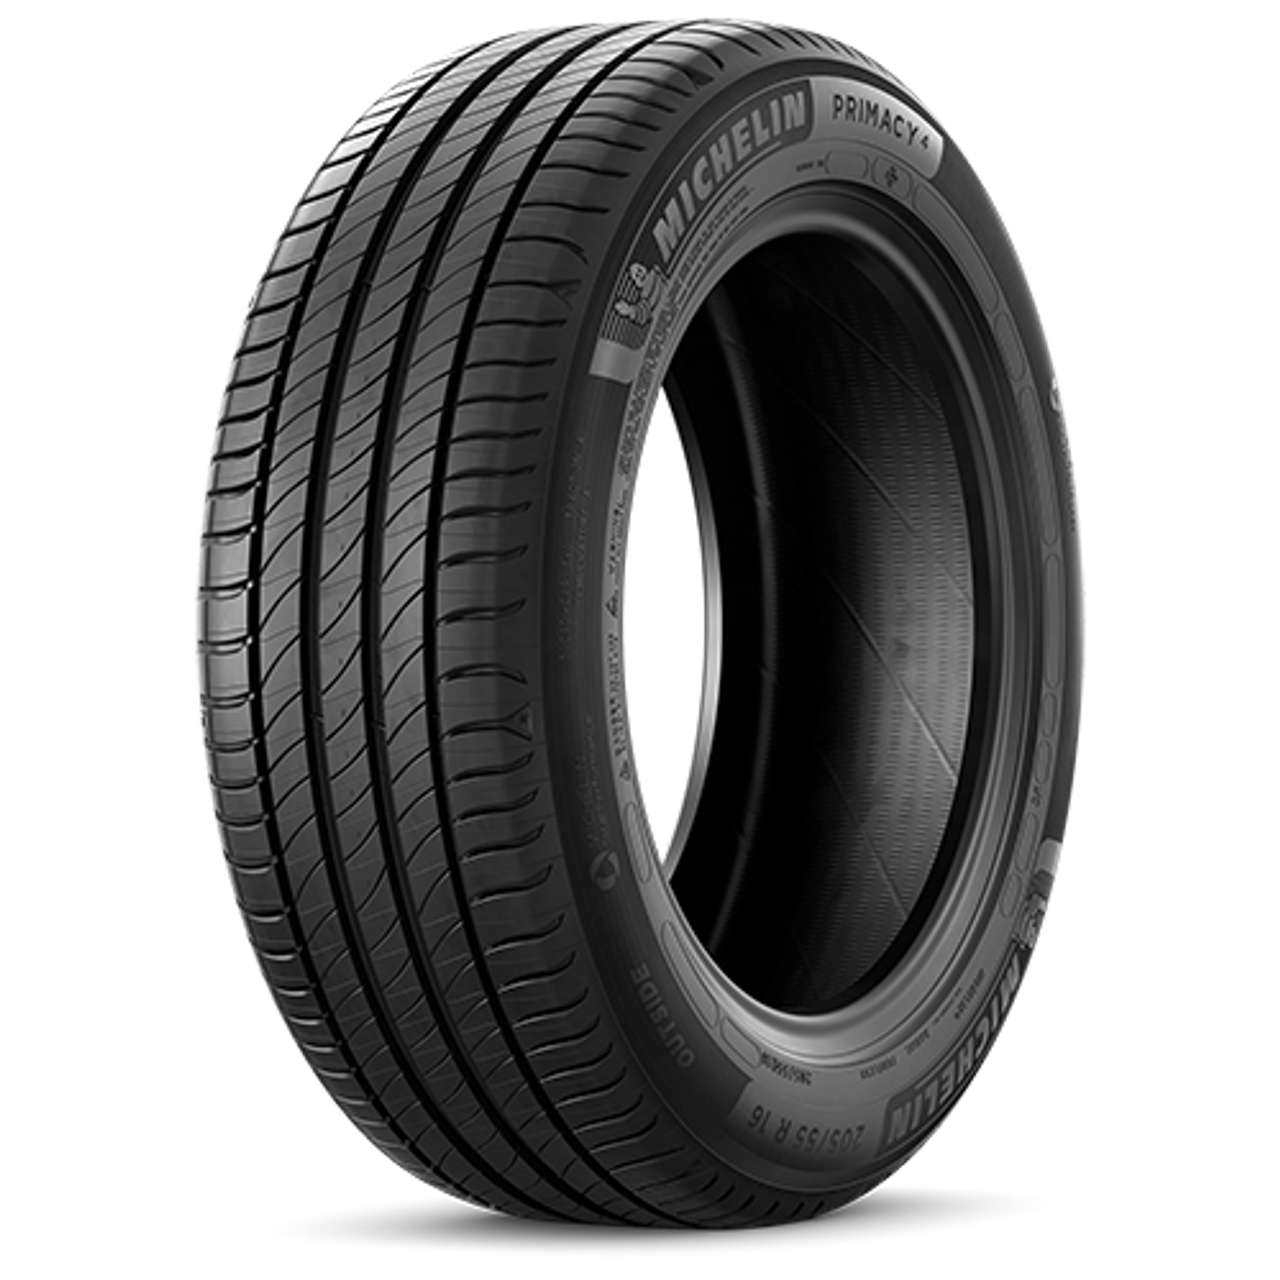 MICHELIN PRIMACY 4+ 215/60R16 95H BSW